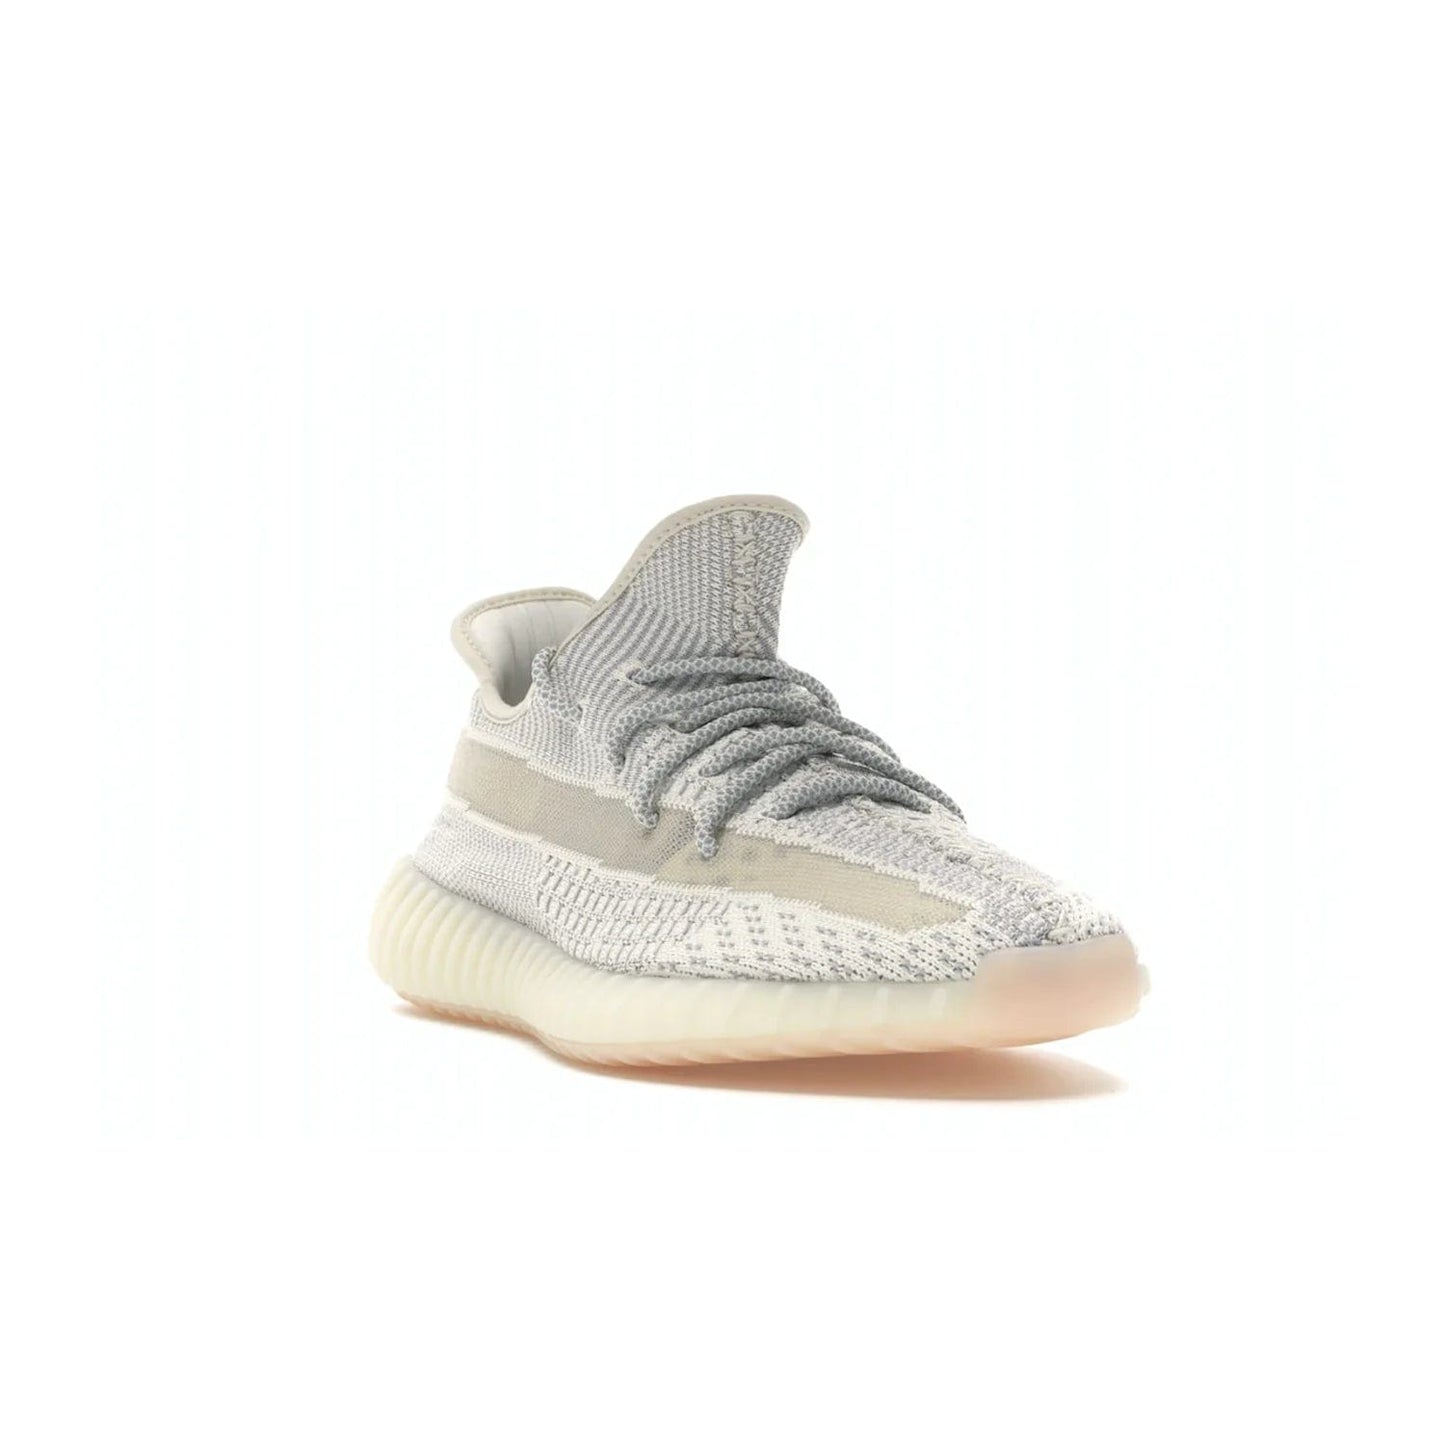 adidas Yeezy Boost 350 V2 Lundmark (Non Reflective) - Image 7 - Only at www.BallersClubKickz.com - Shop the exclusive adidas Yeezy Boost 350 V2 Lundmark with a subtle summer color, mesh upper, white-to-cream transitional midsole, light tan outsole, and pink middle stripe. Comfort and style come together in this perfect summer 350 V2. Released on July 11, 2019.